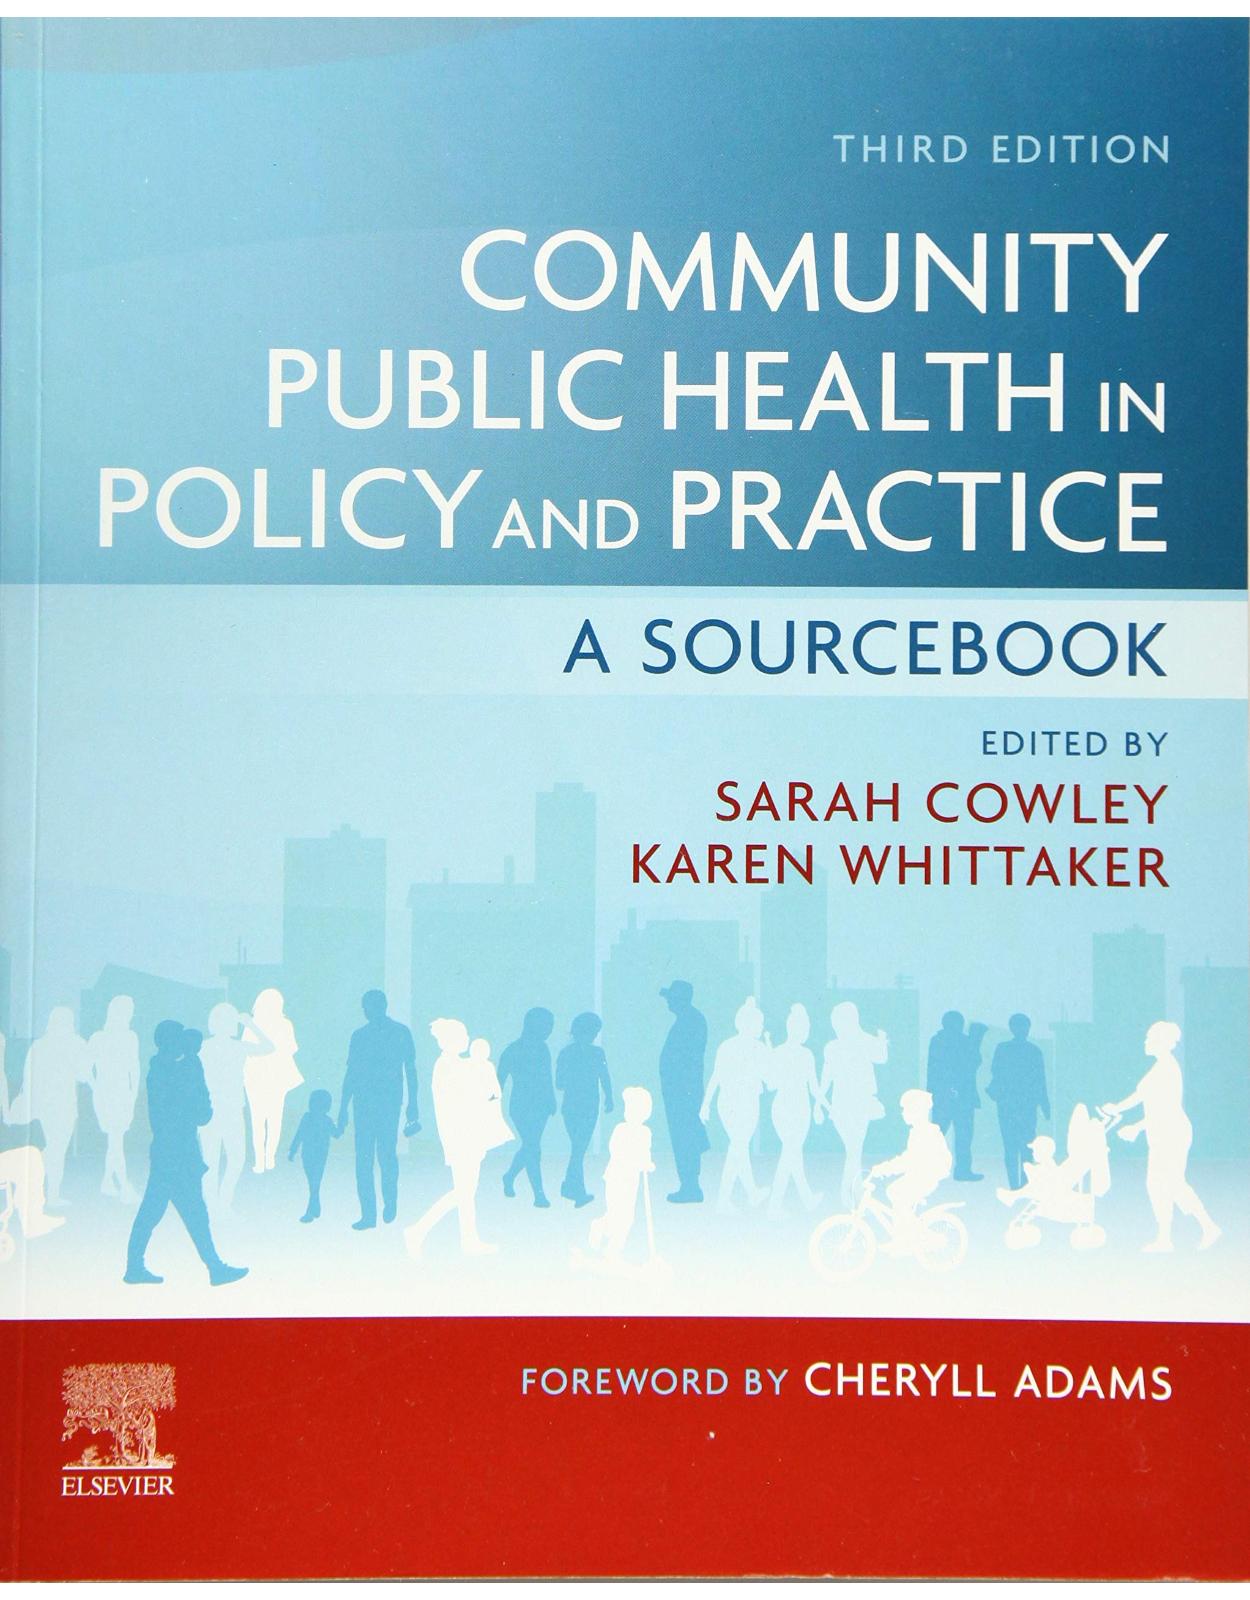 Community Public Health in Policy and Practice: A Sourcebook